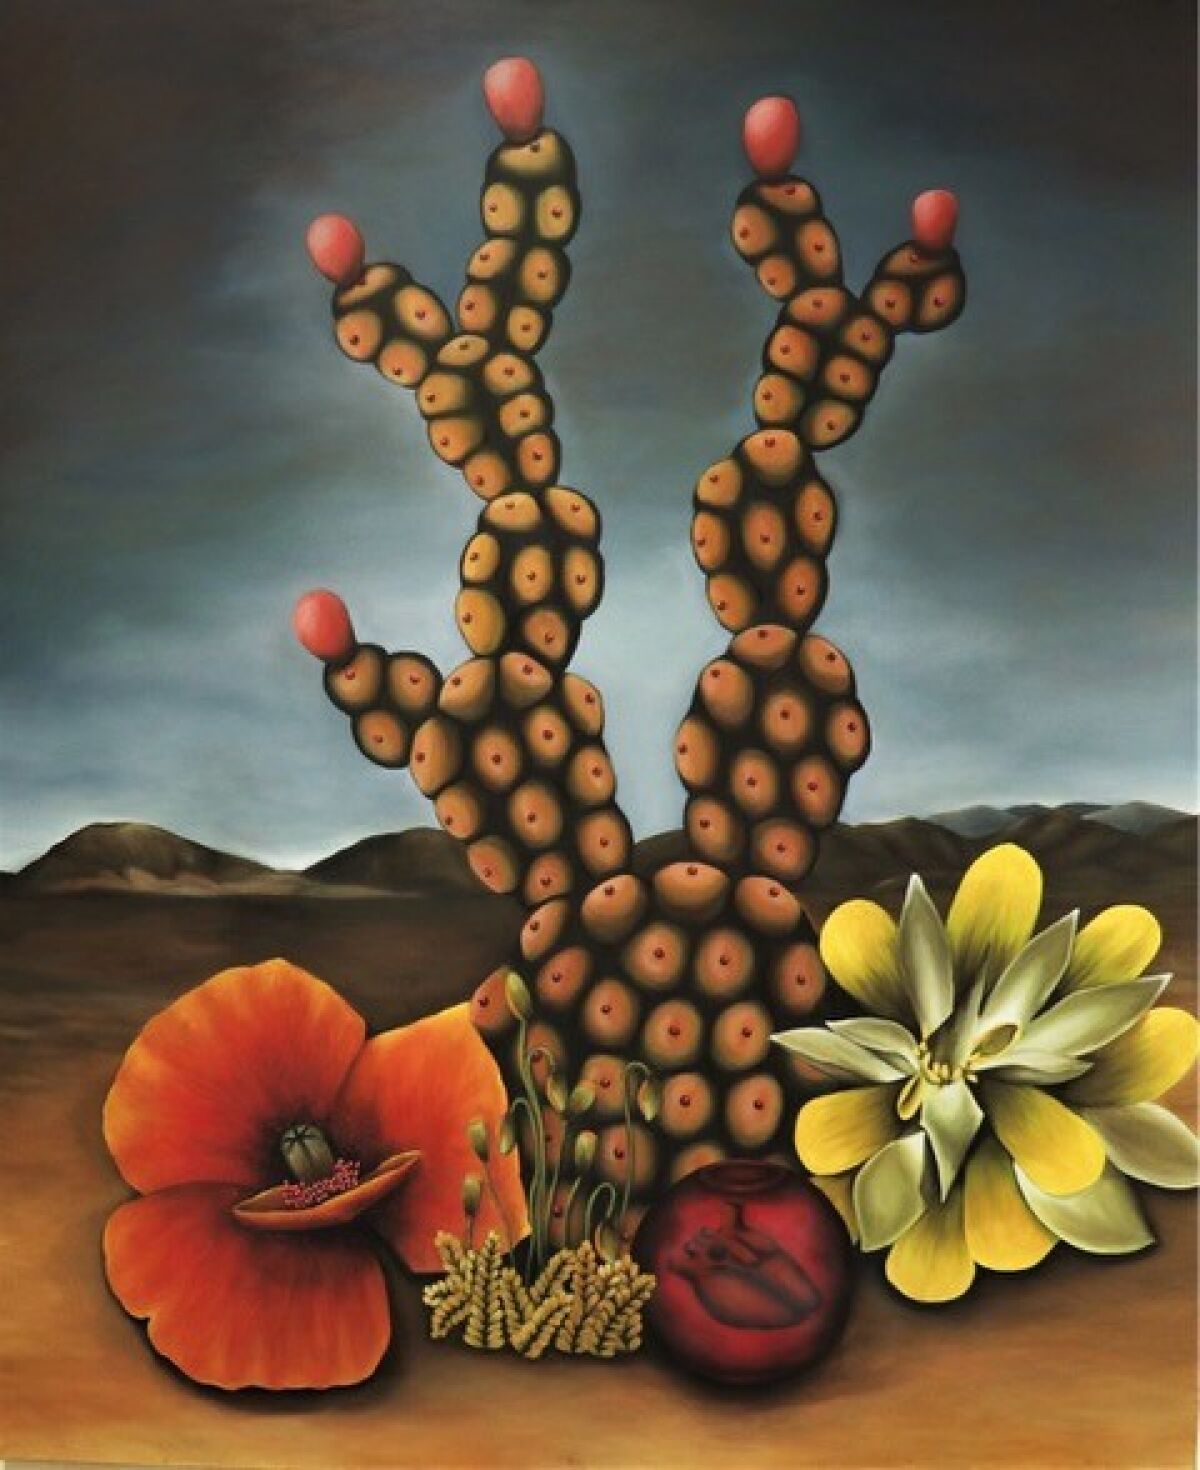 An oil painting of plants from the regions that reflect the artist's ethnicities